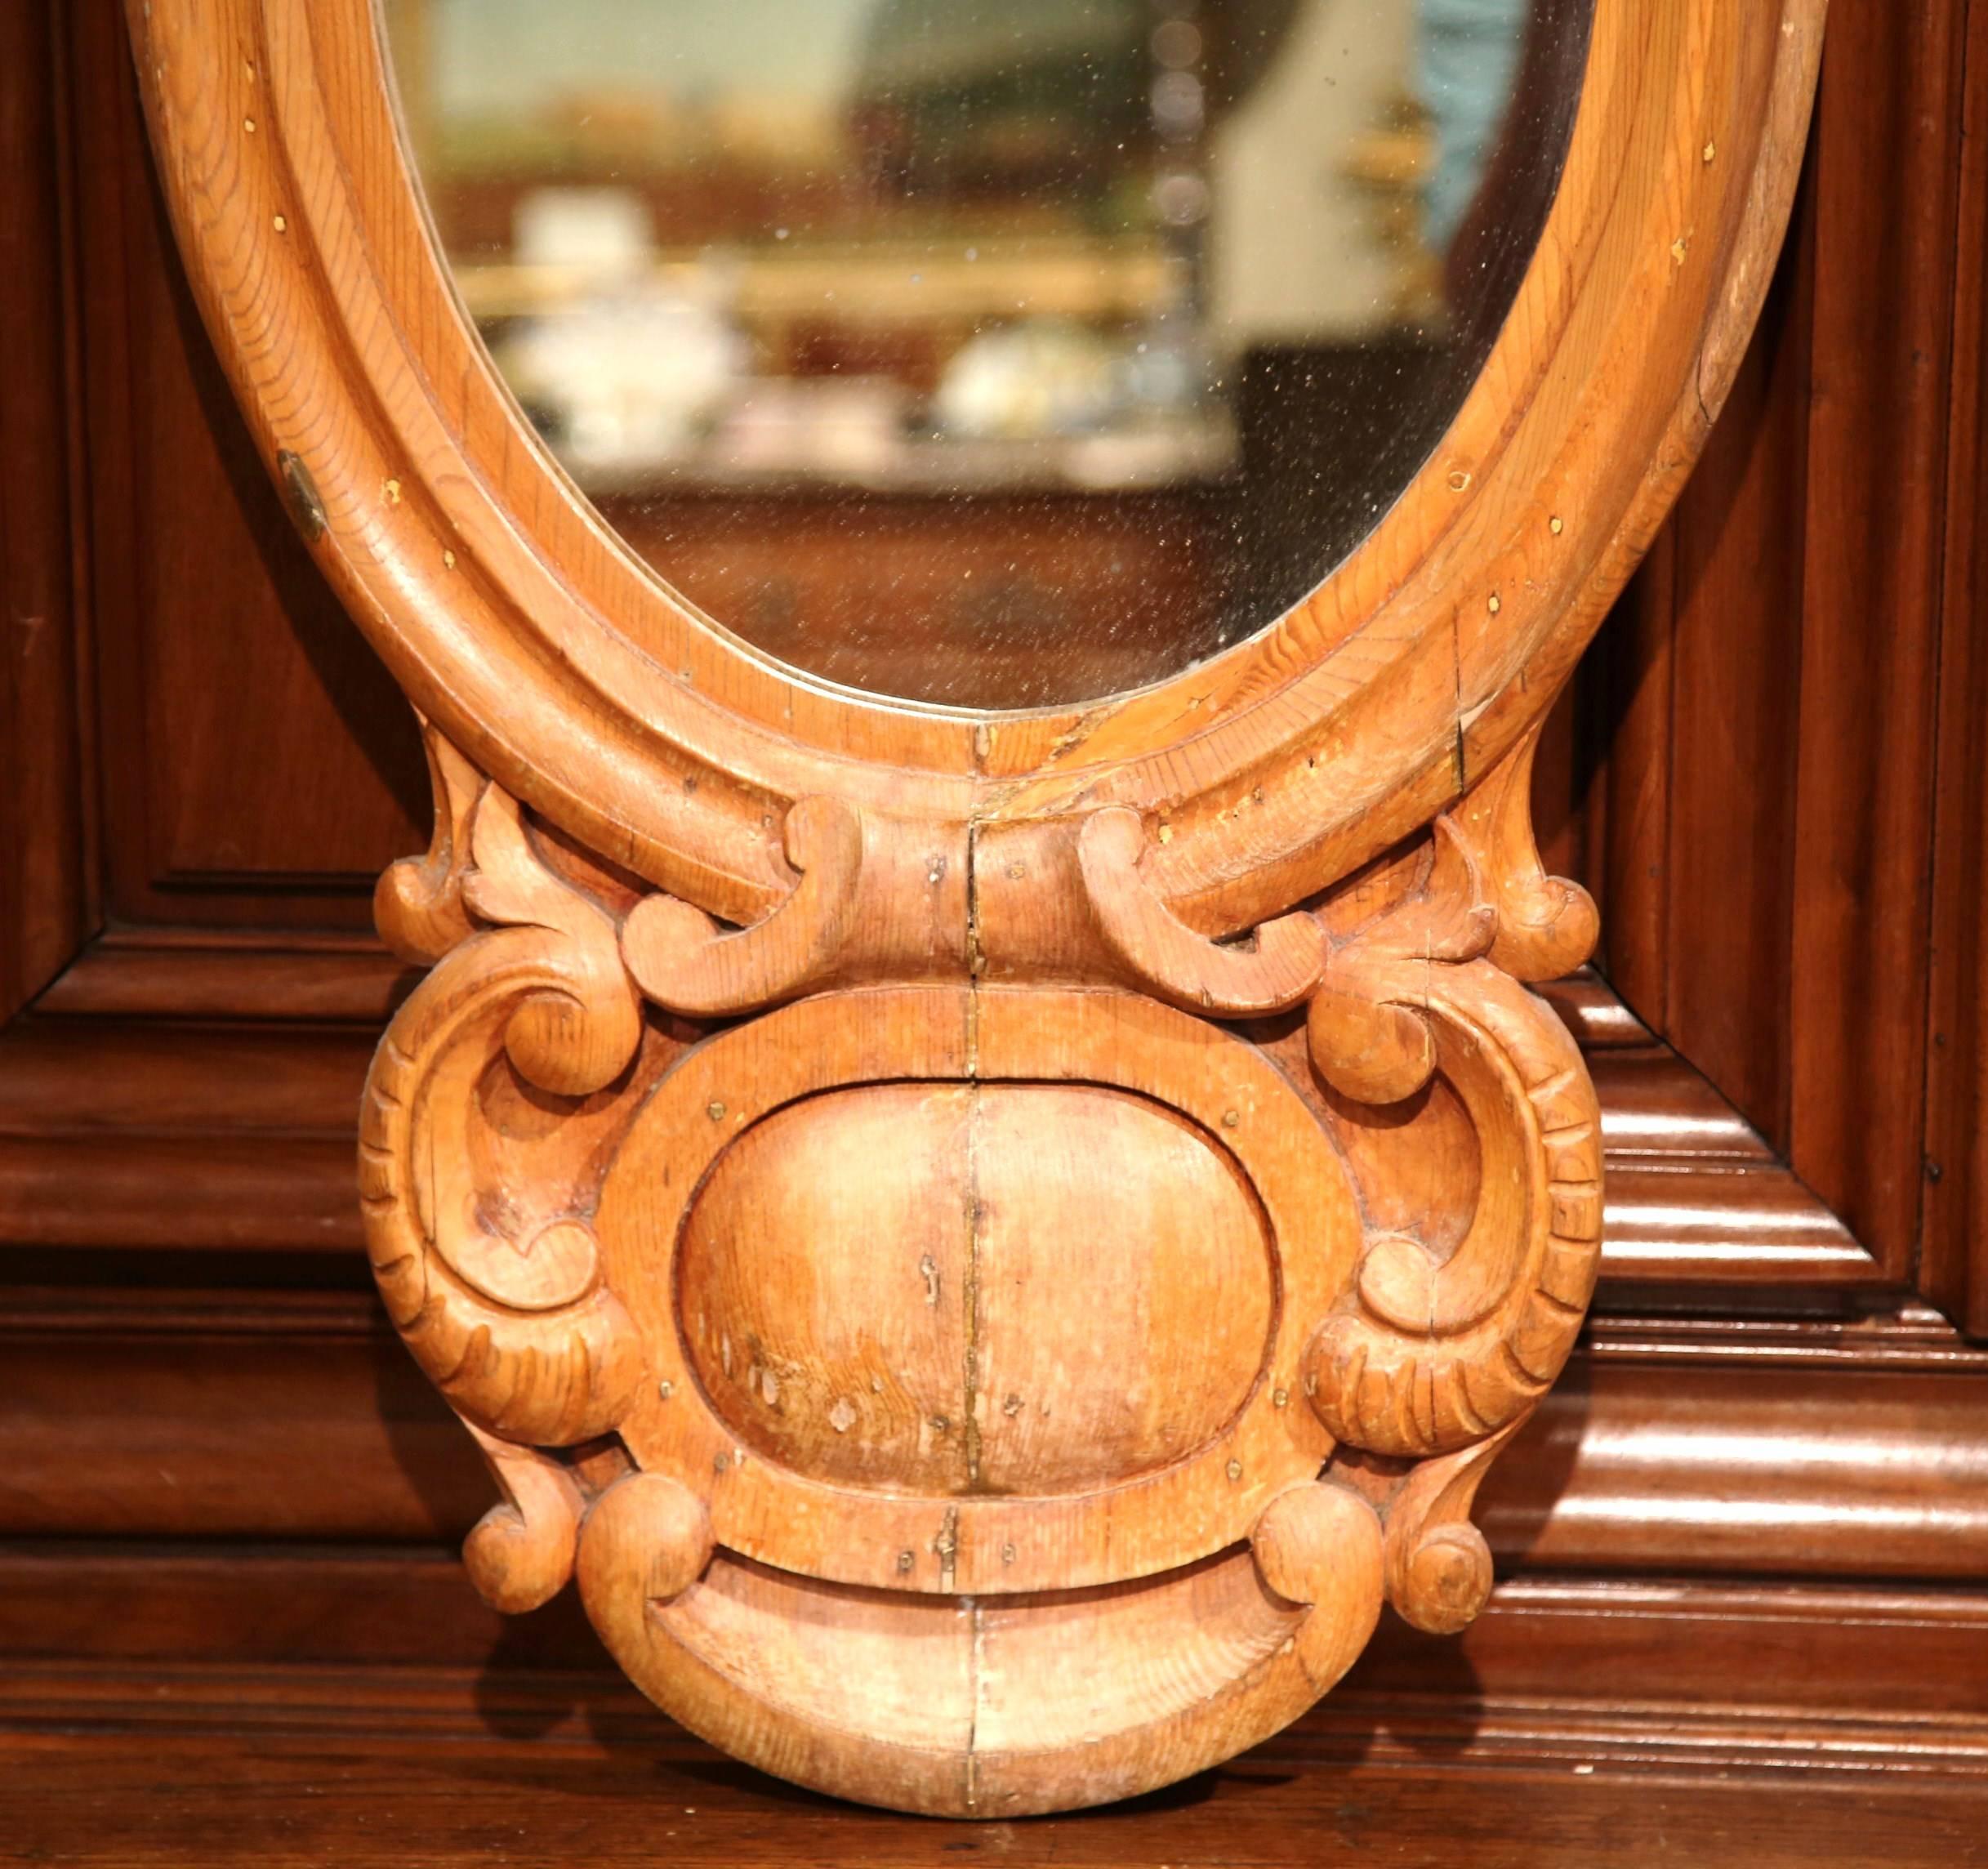 Decorate your powder room or entryway with this elegant, antique wall mirror from England. Crafted, circa 1860 and made of pine, the mirror features a carved shell at the pediment, an oval mercury glass in the center and a carved medallion motif at